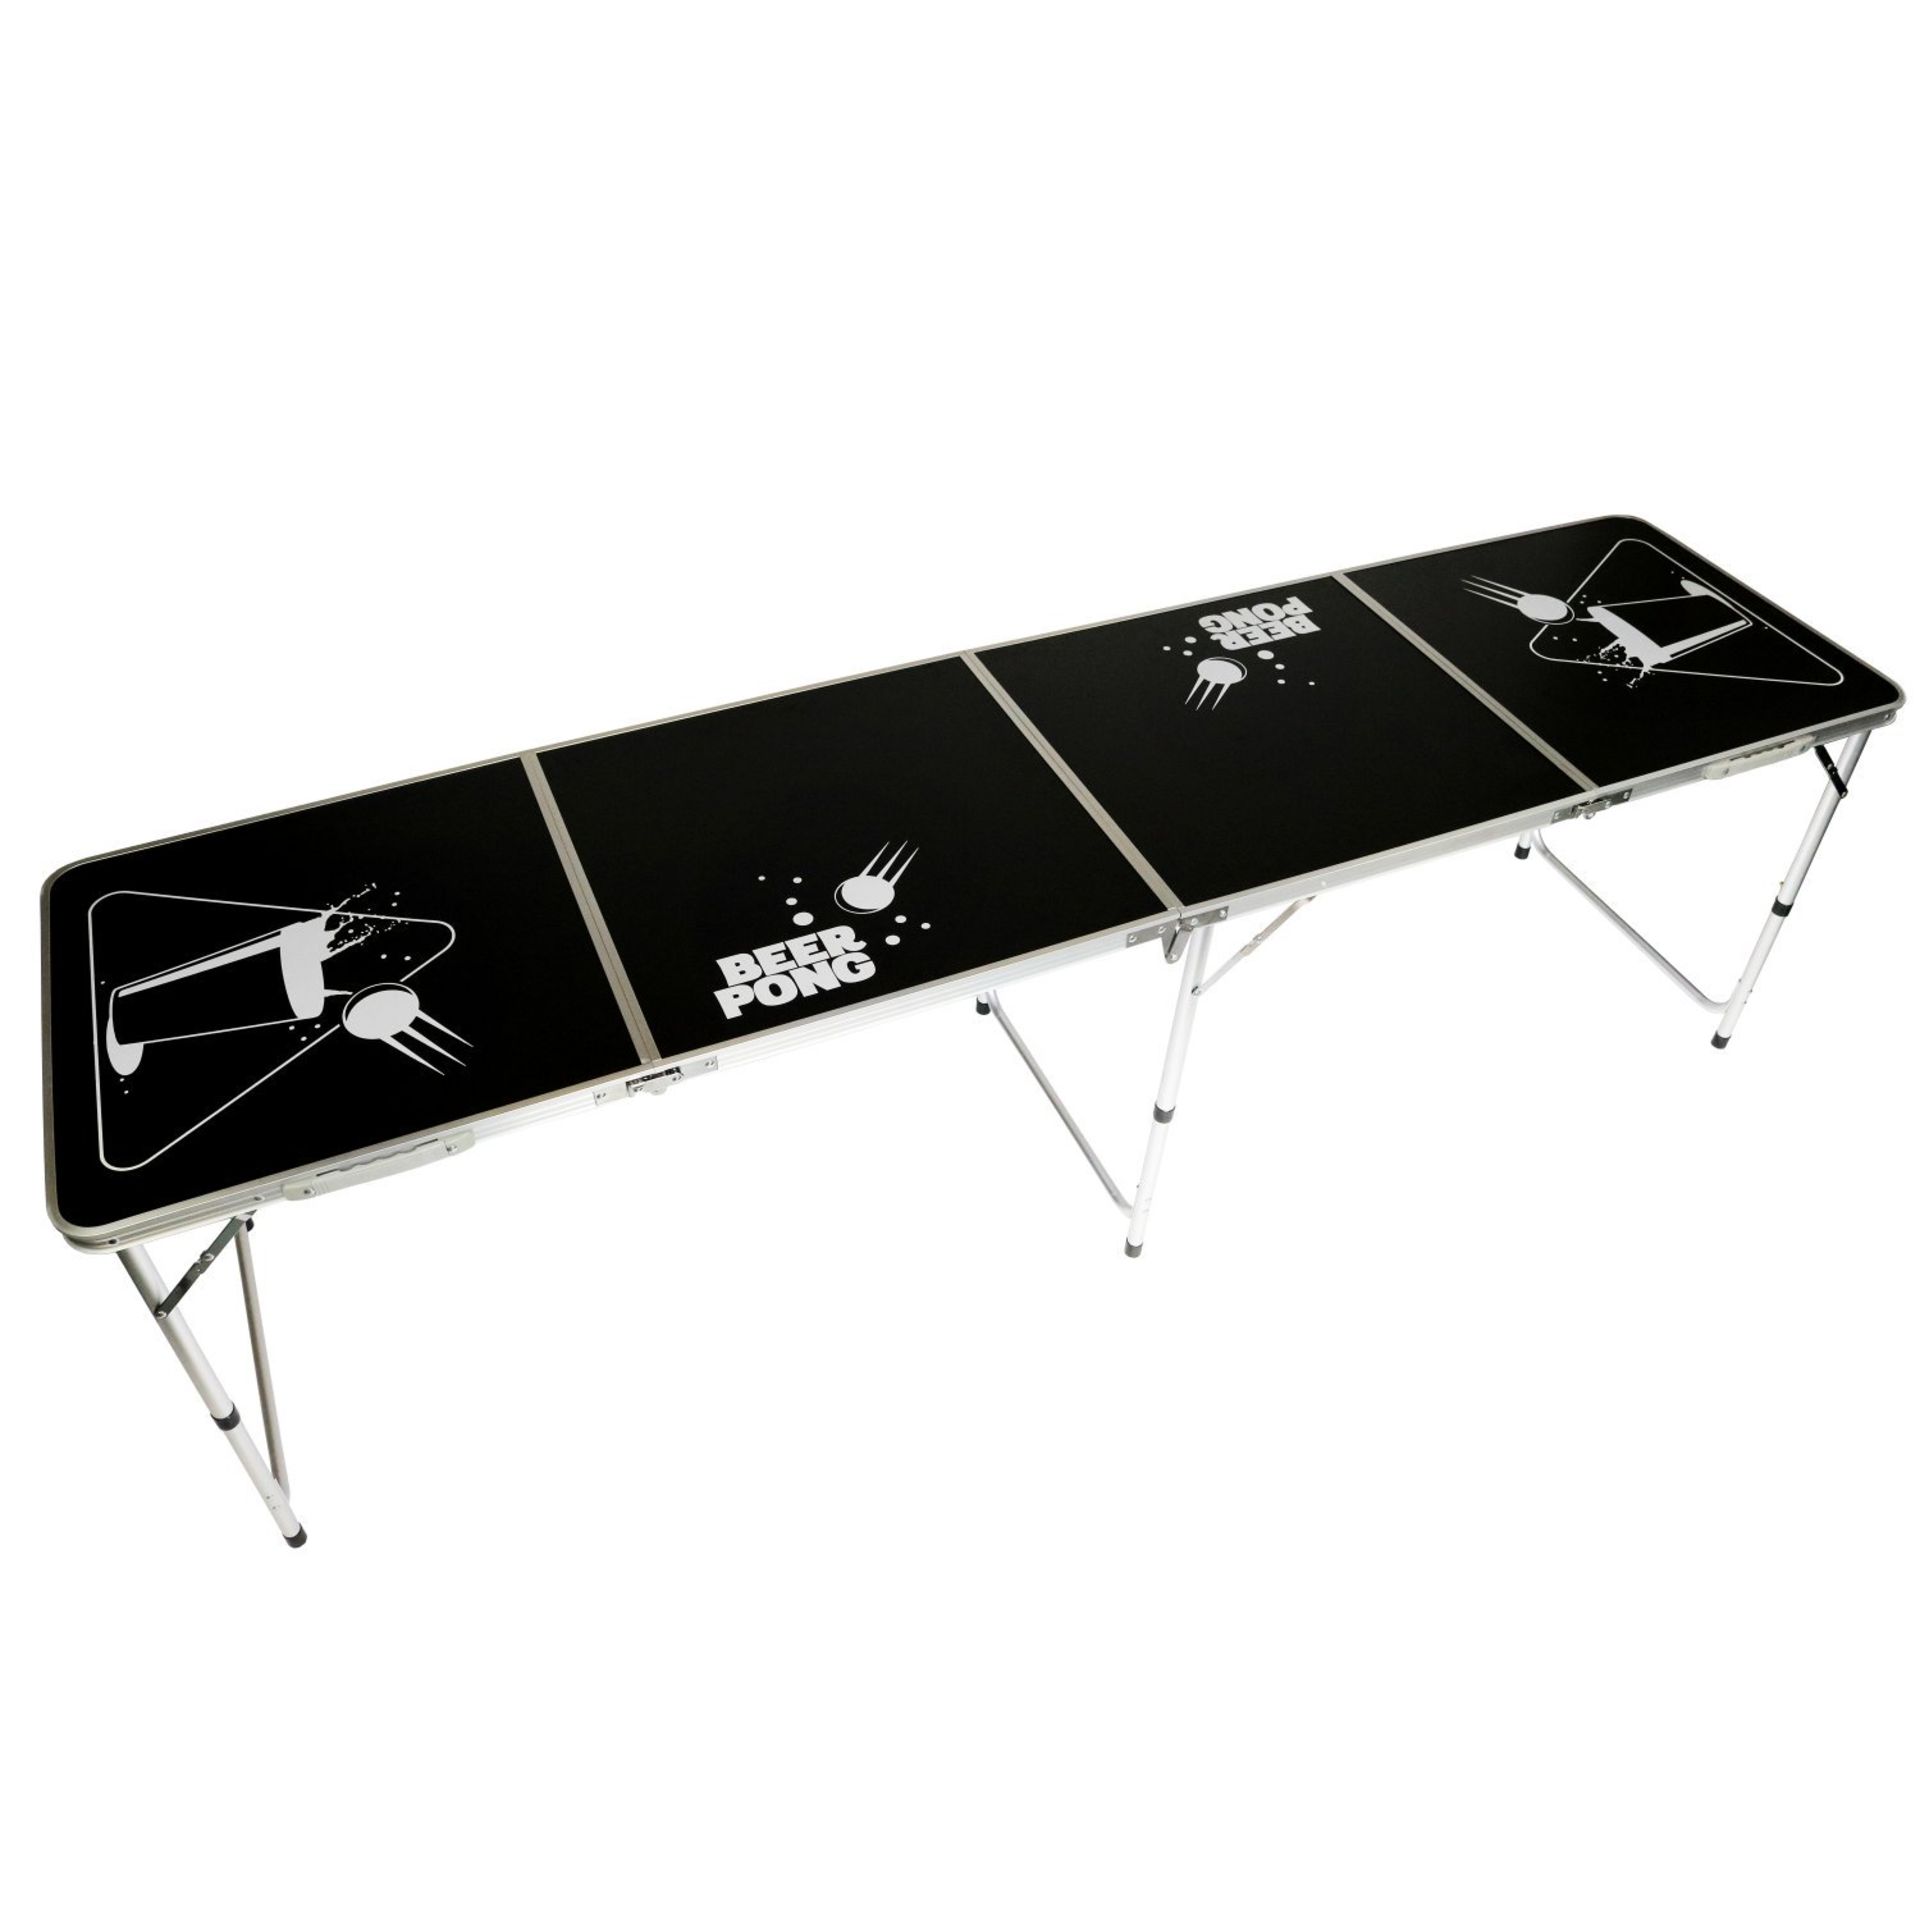 (G9) Official Size 8 Foot Folding Beer Pong Table BBQ Drinking Party Wipe Clean Surface Hei...